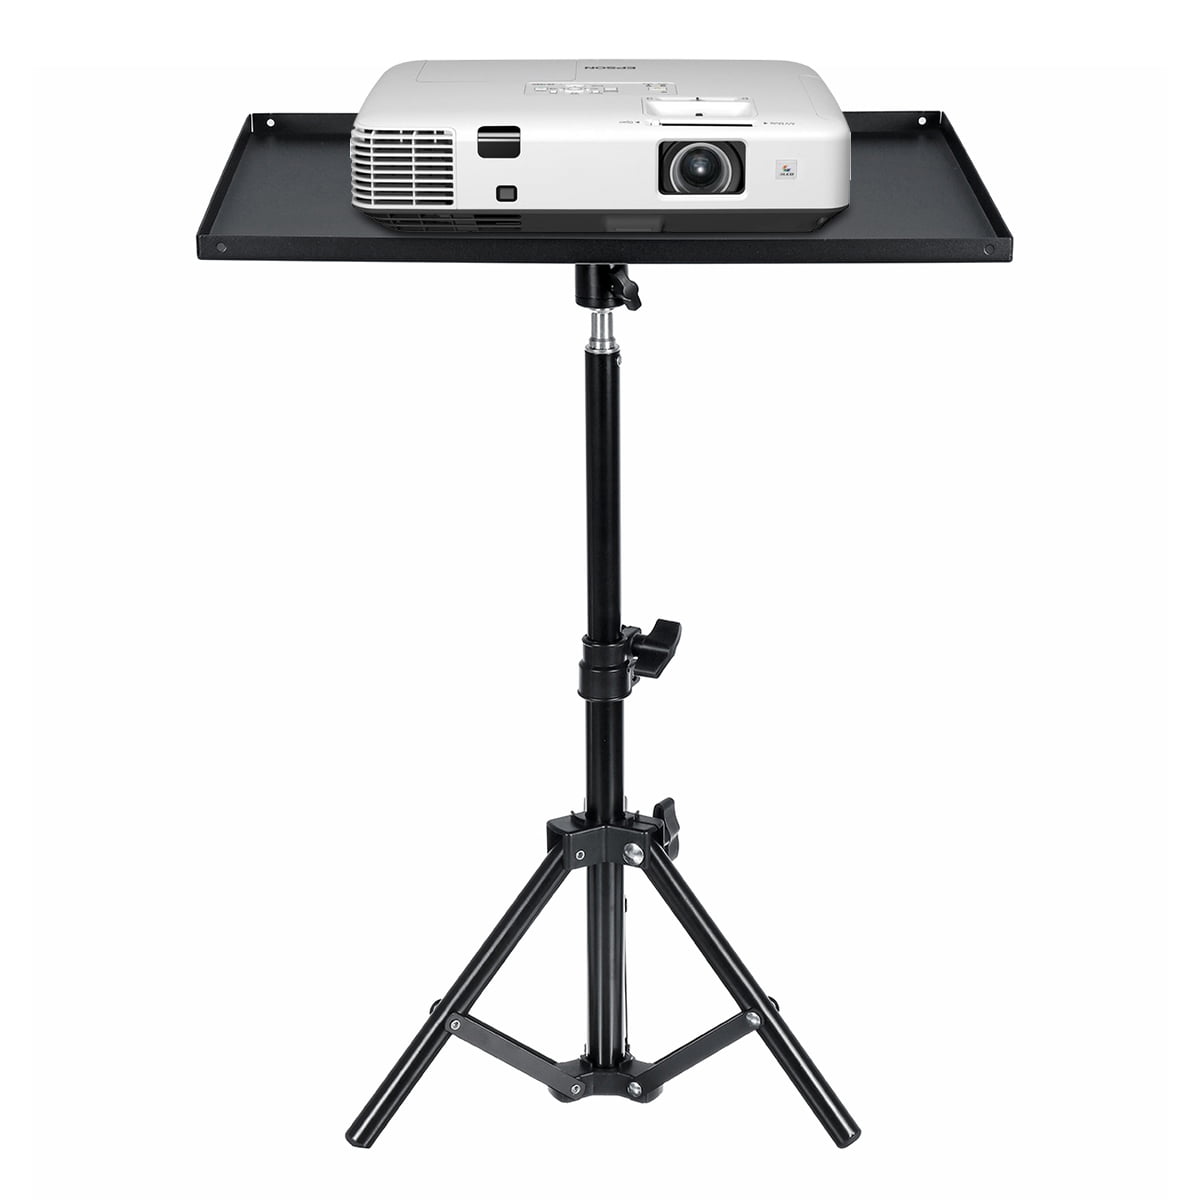 Folding Floor Stand Projector Tripod Stand Outdoor Computer Table Stand for Office Stage or Studio Adjustable Portable Laptop DJ Equipment Tray with Mobile Phone Holder